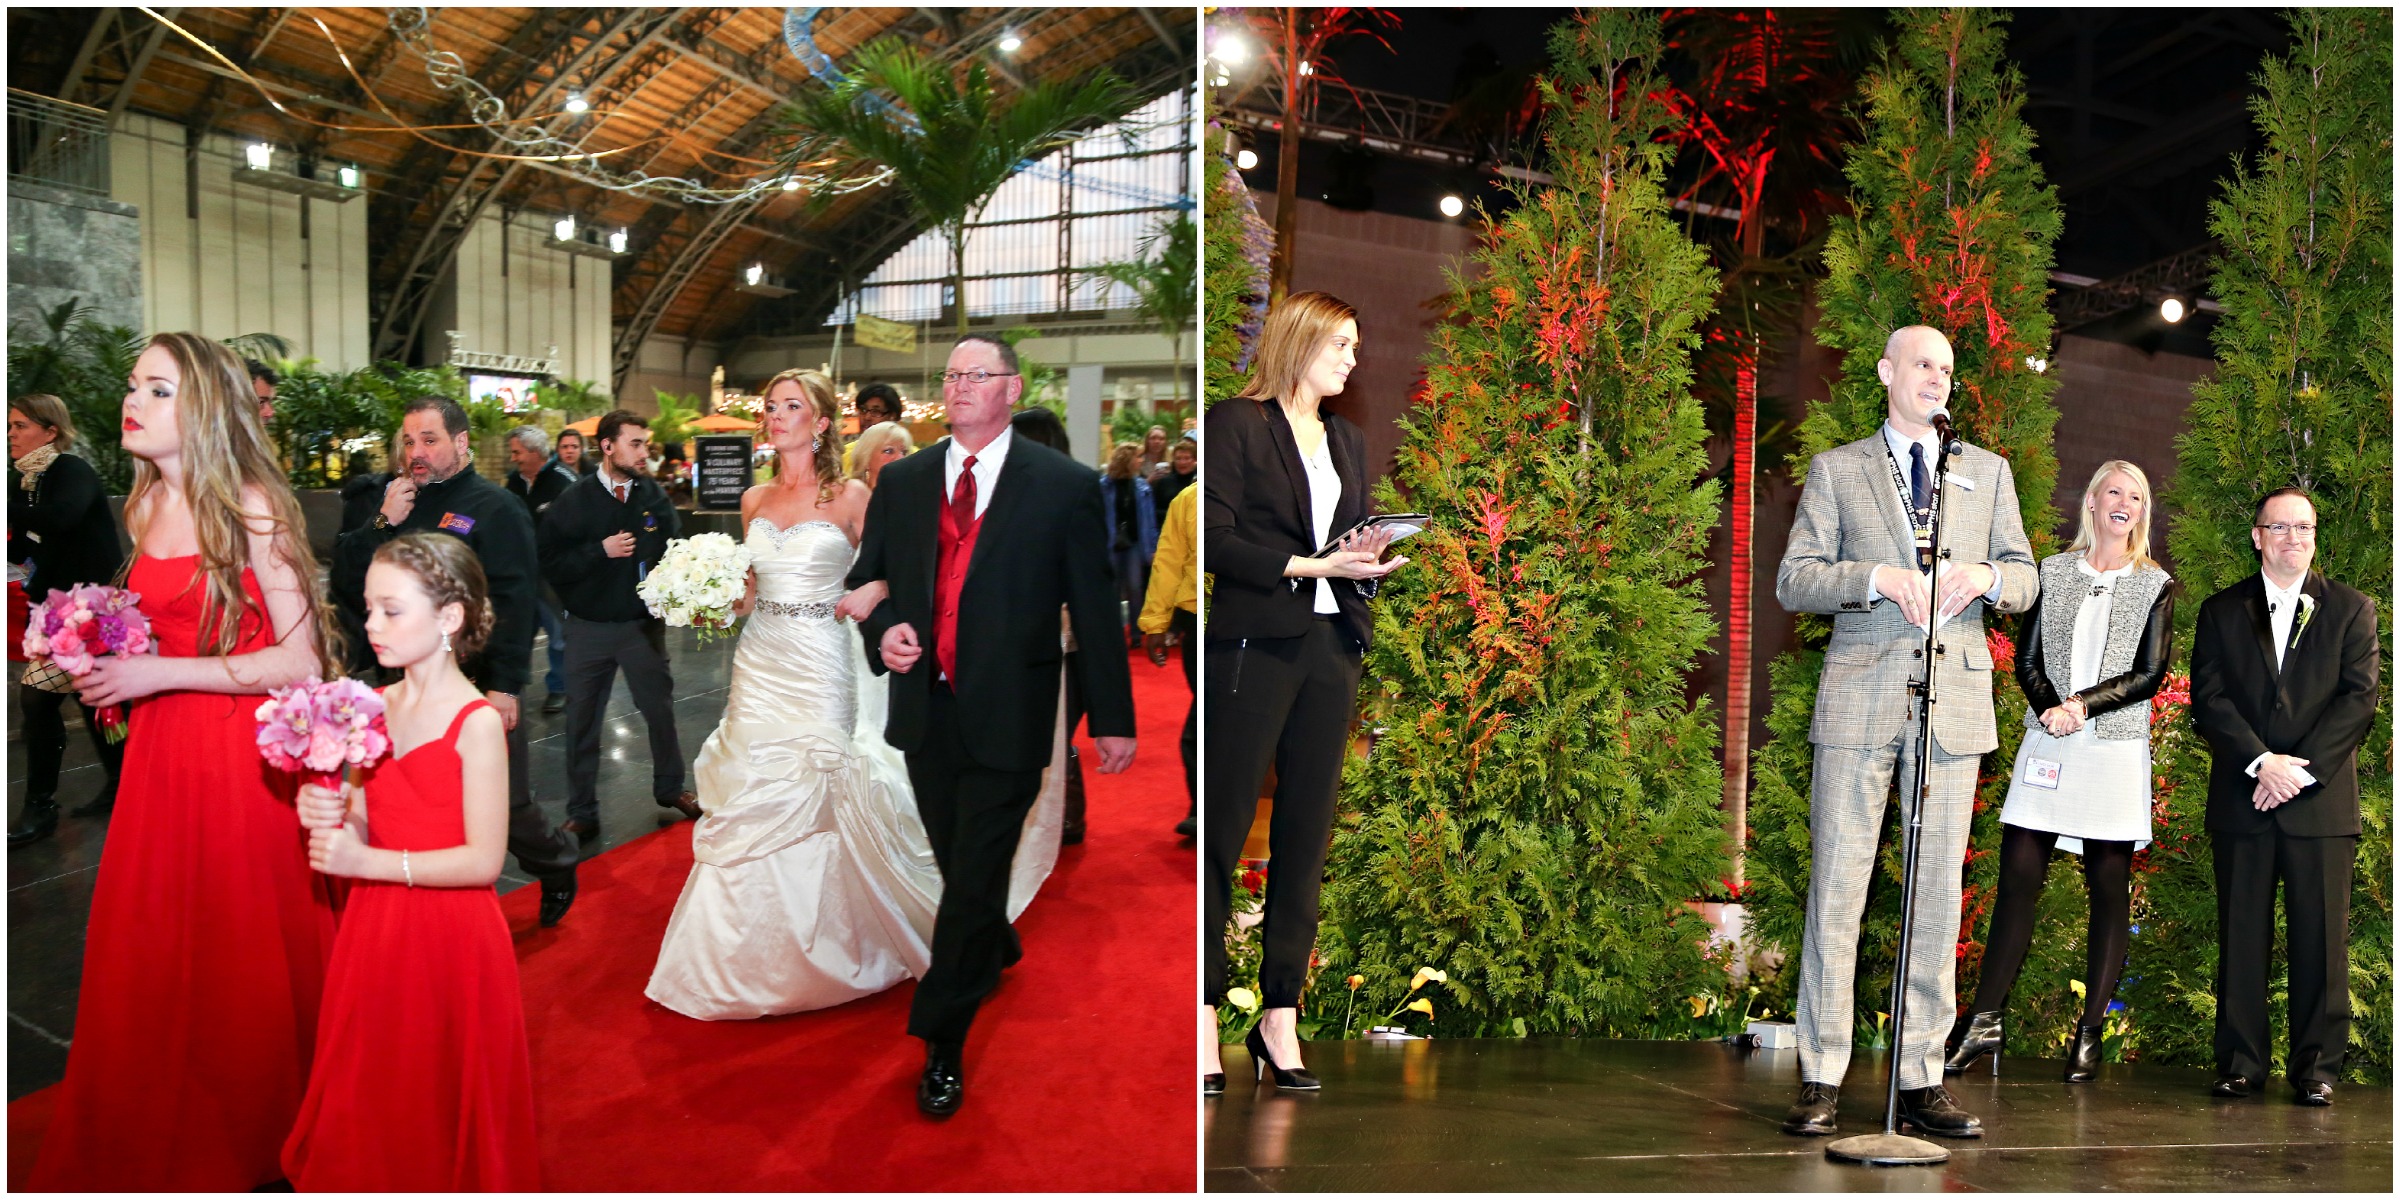 The Bride & Groom Make Their Way Top the Flower Show Floor